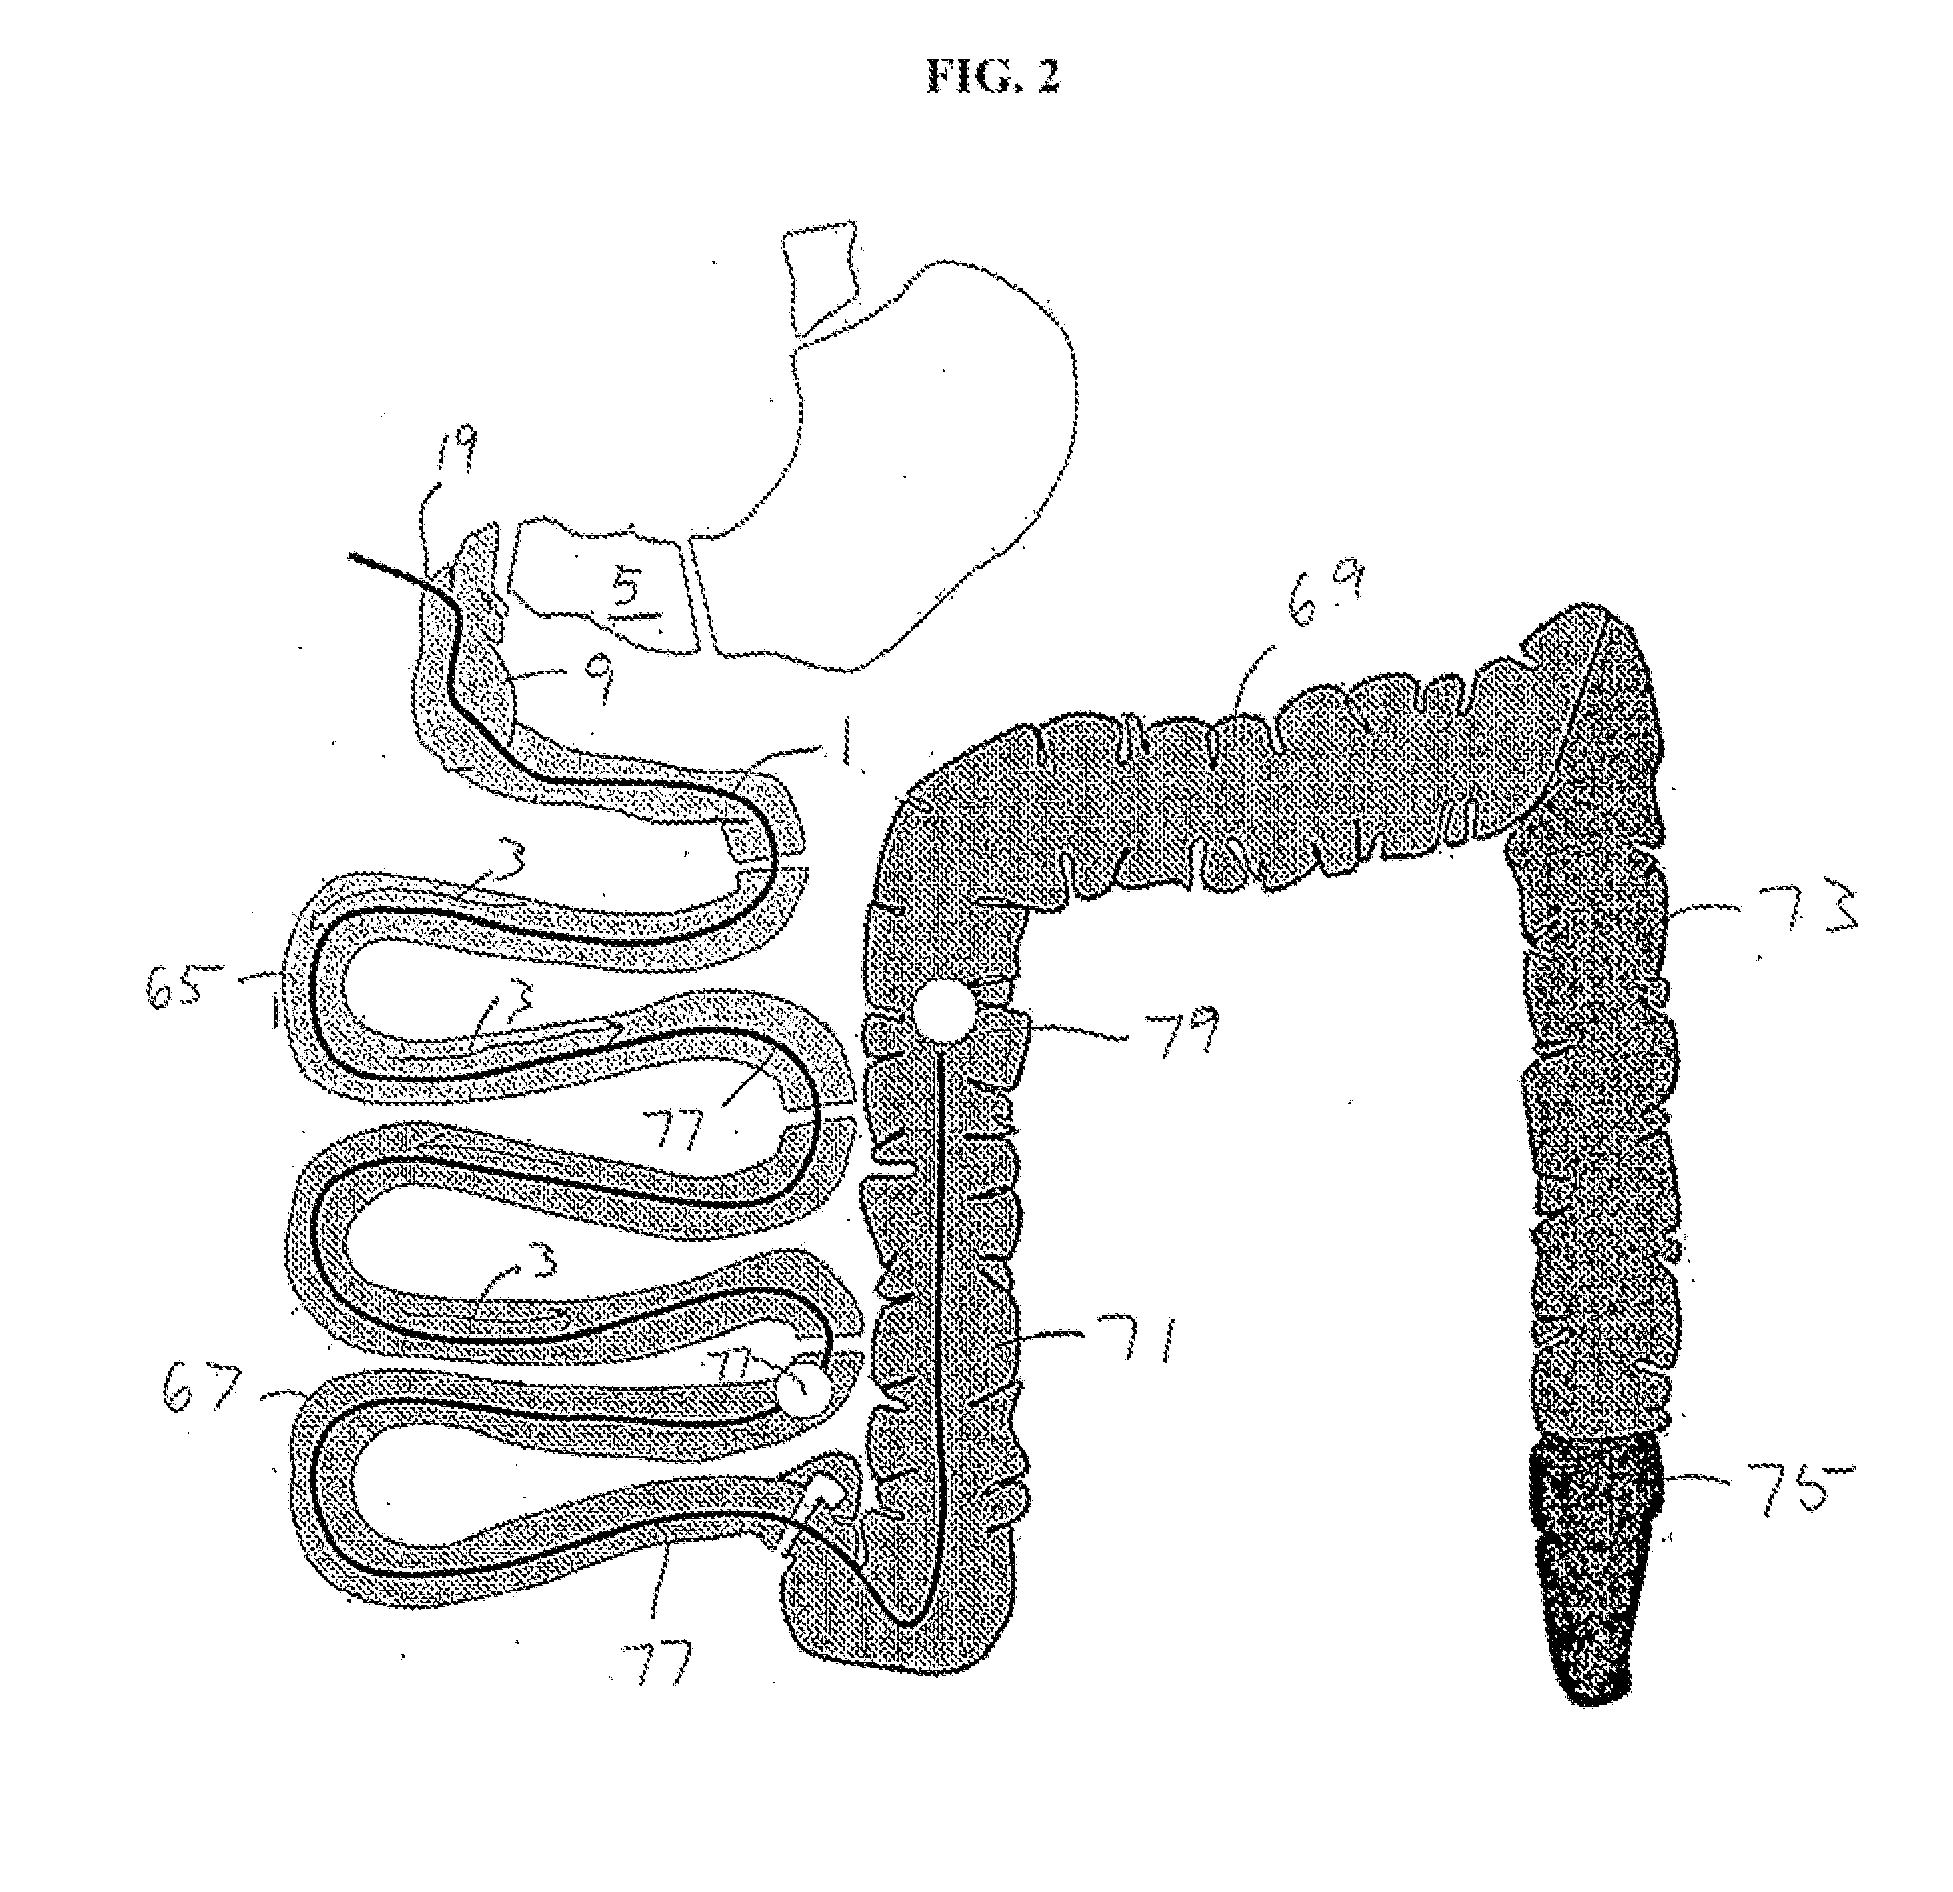 Methods and Apparatus for Treating Obesity and Diabetes